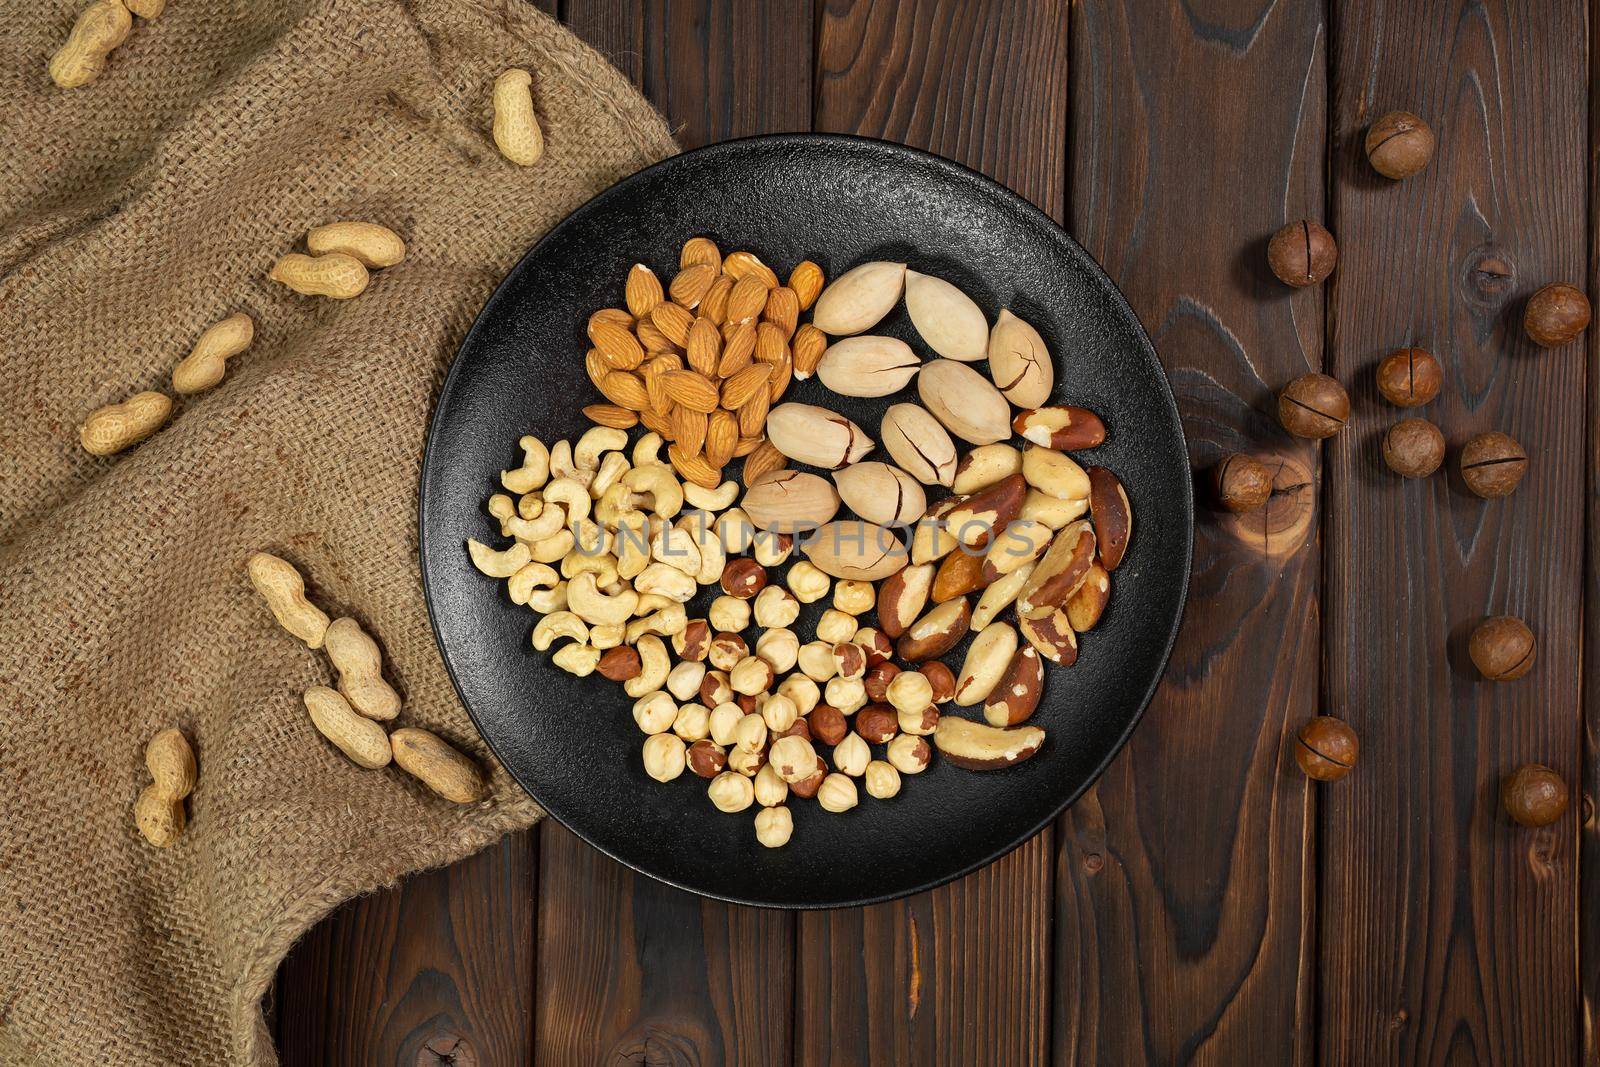 Mixture of nuts in a black plate on a brown wooden background.